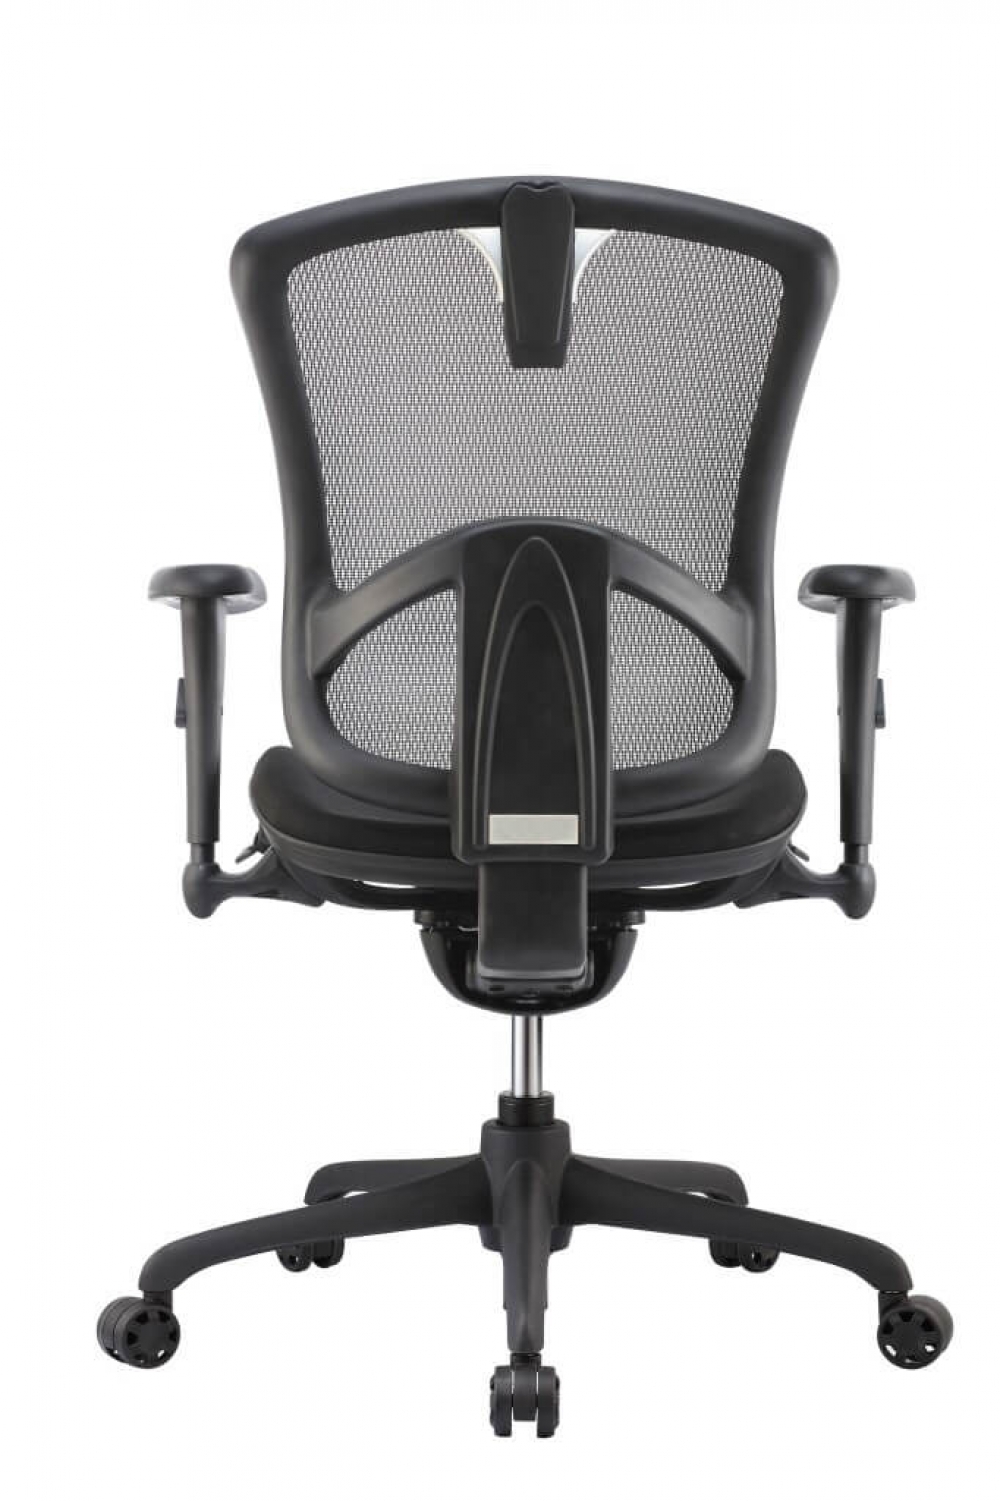 Office Desk Chairs - Bryson 1FS Black Office Chair